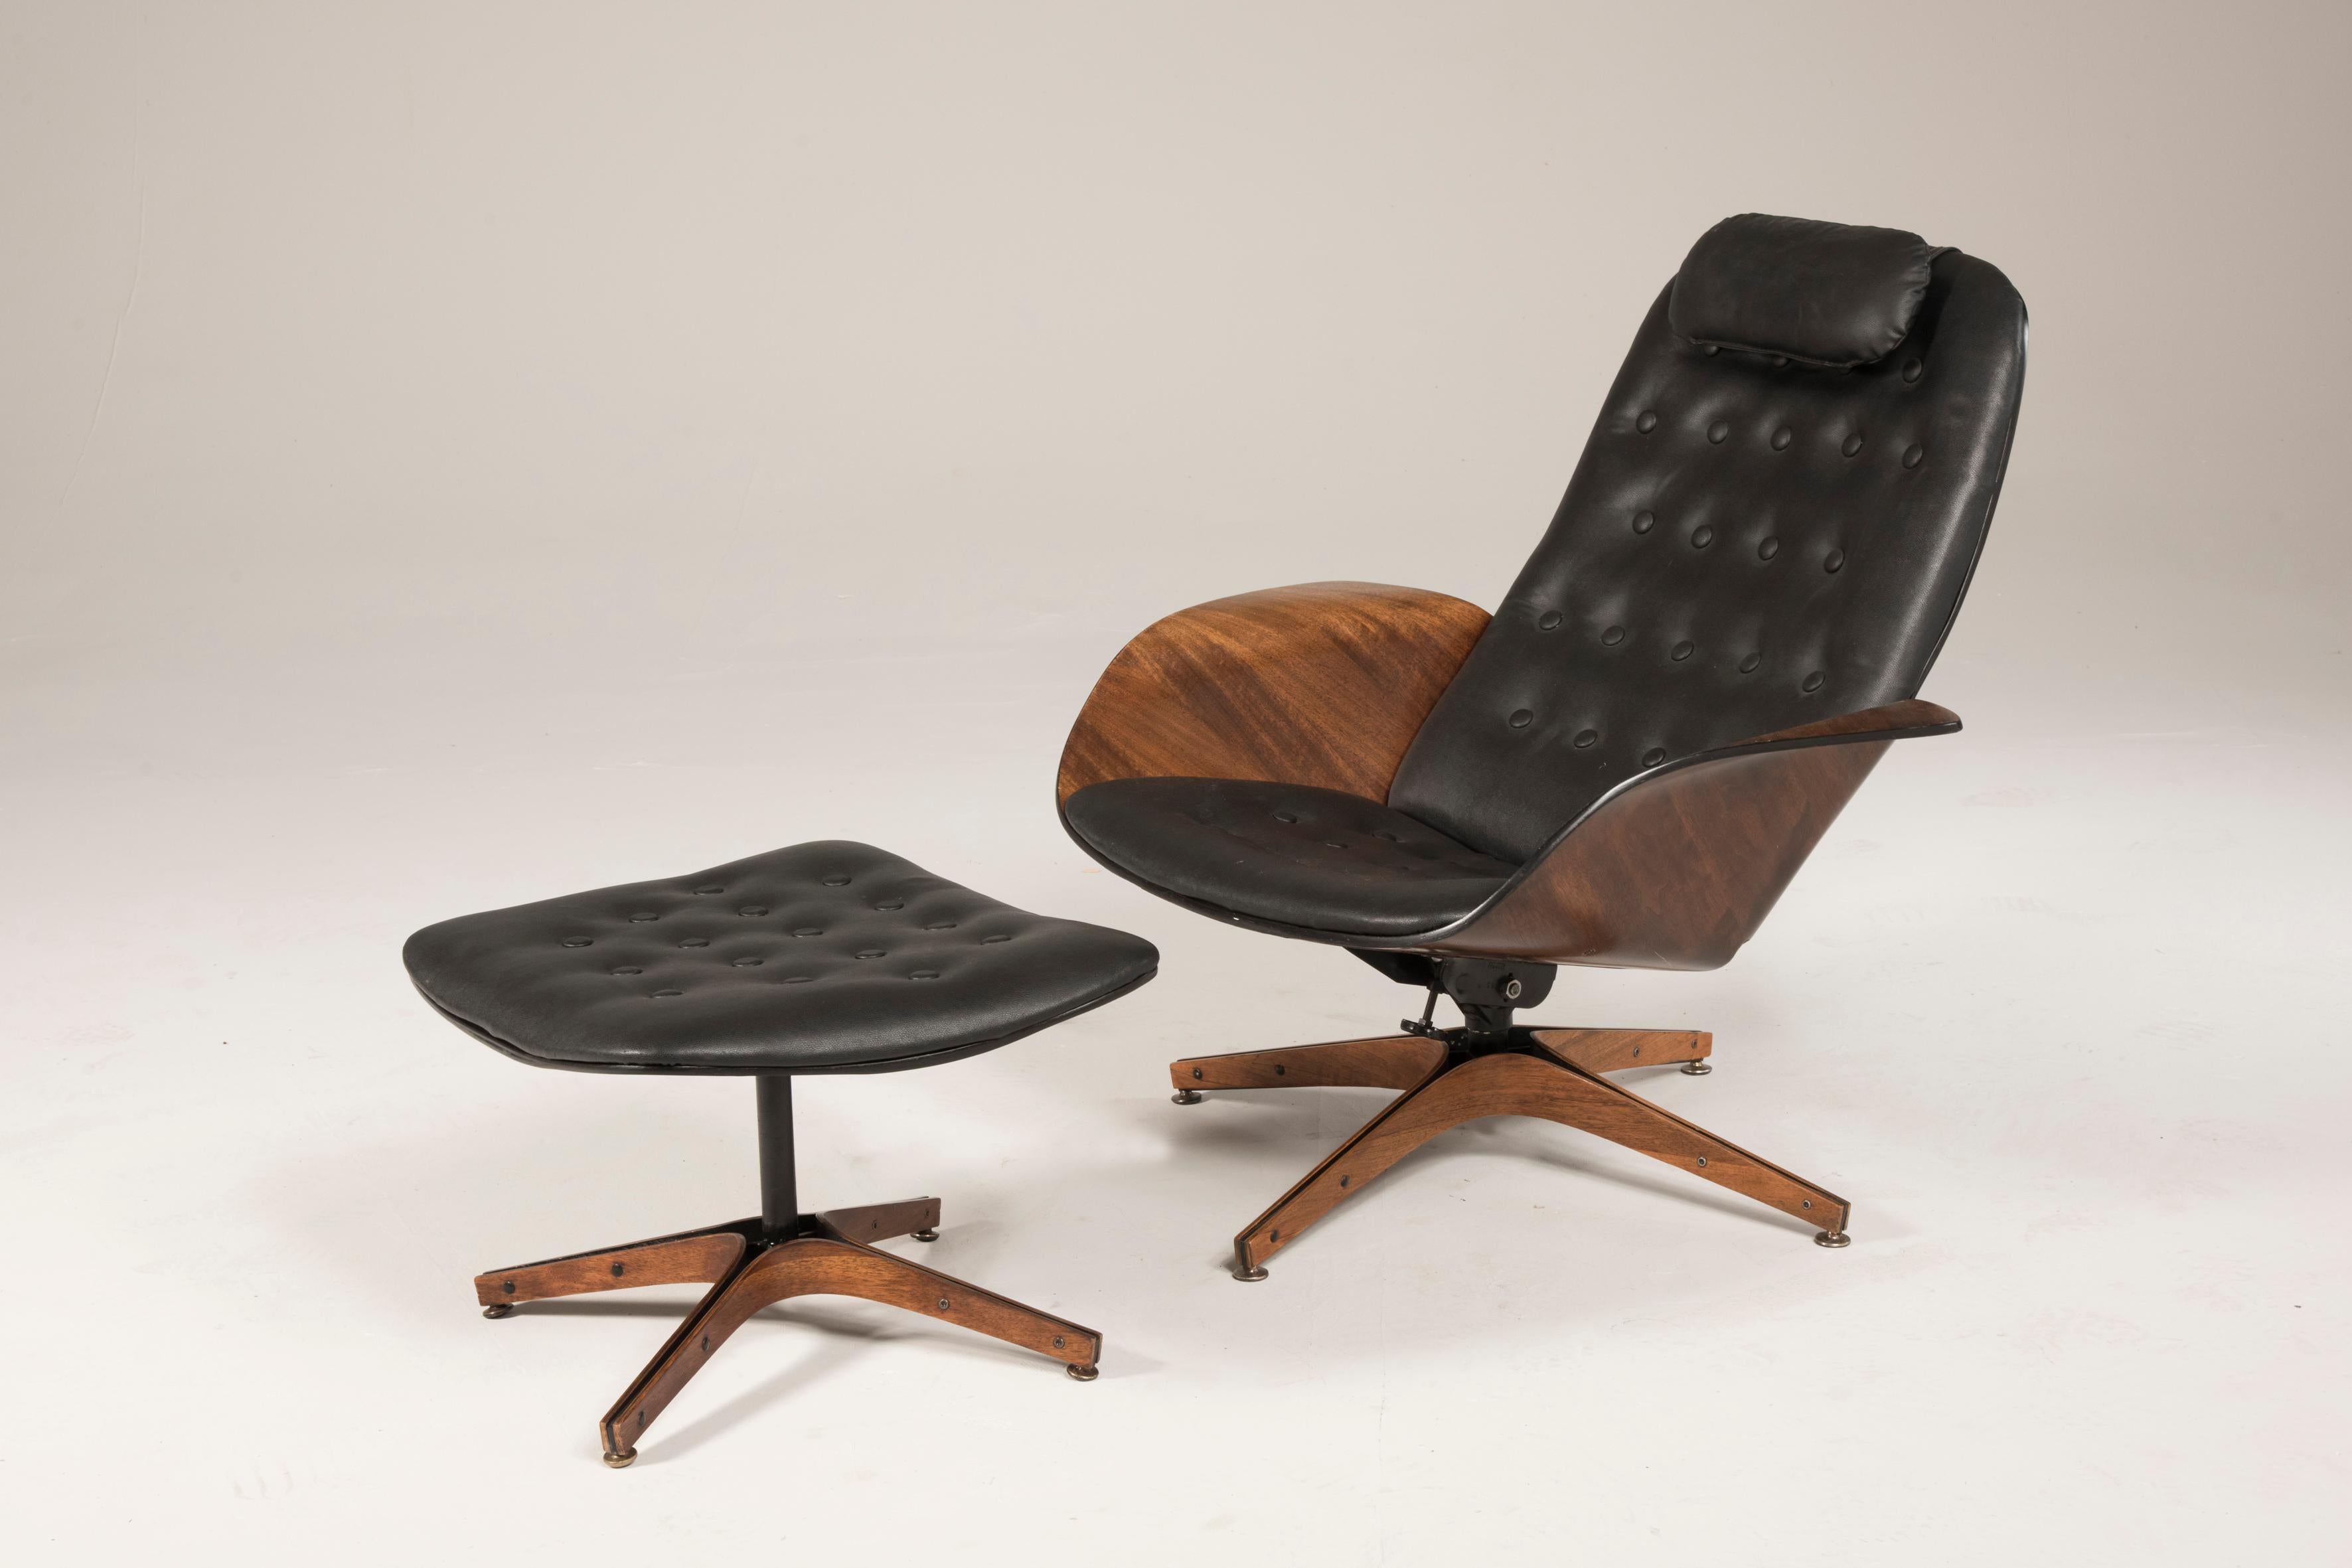 1964 Mr. Chair II by George Mulhauser for Plycraft and Ottoman
Swivel and tilting chair, Original Black leather seats and cushion.
Original sticker is present.
Excellent good conditions.
A video is available upon request.
Size or armchair: W